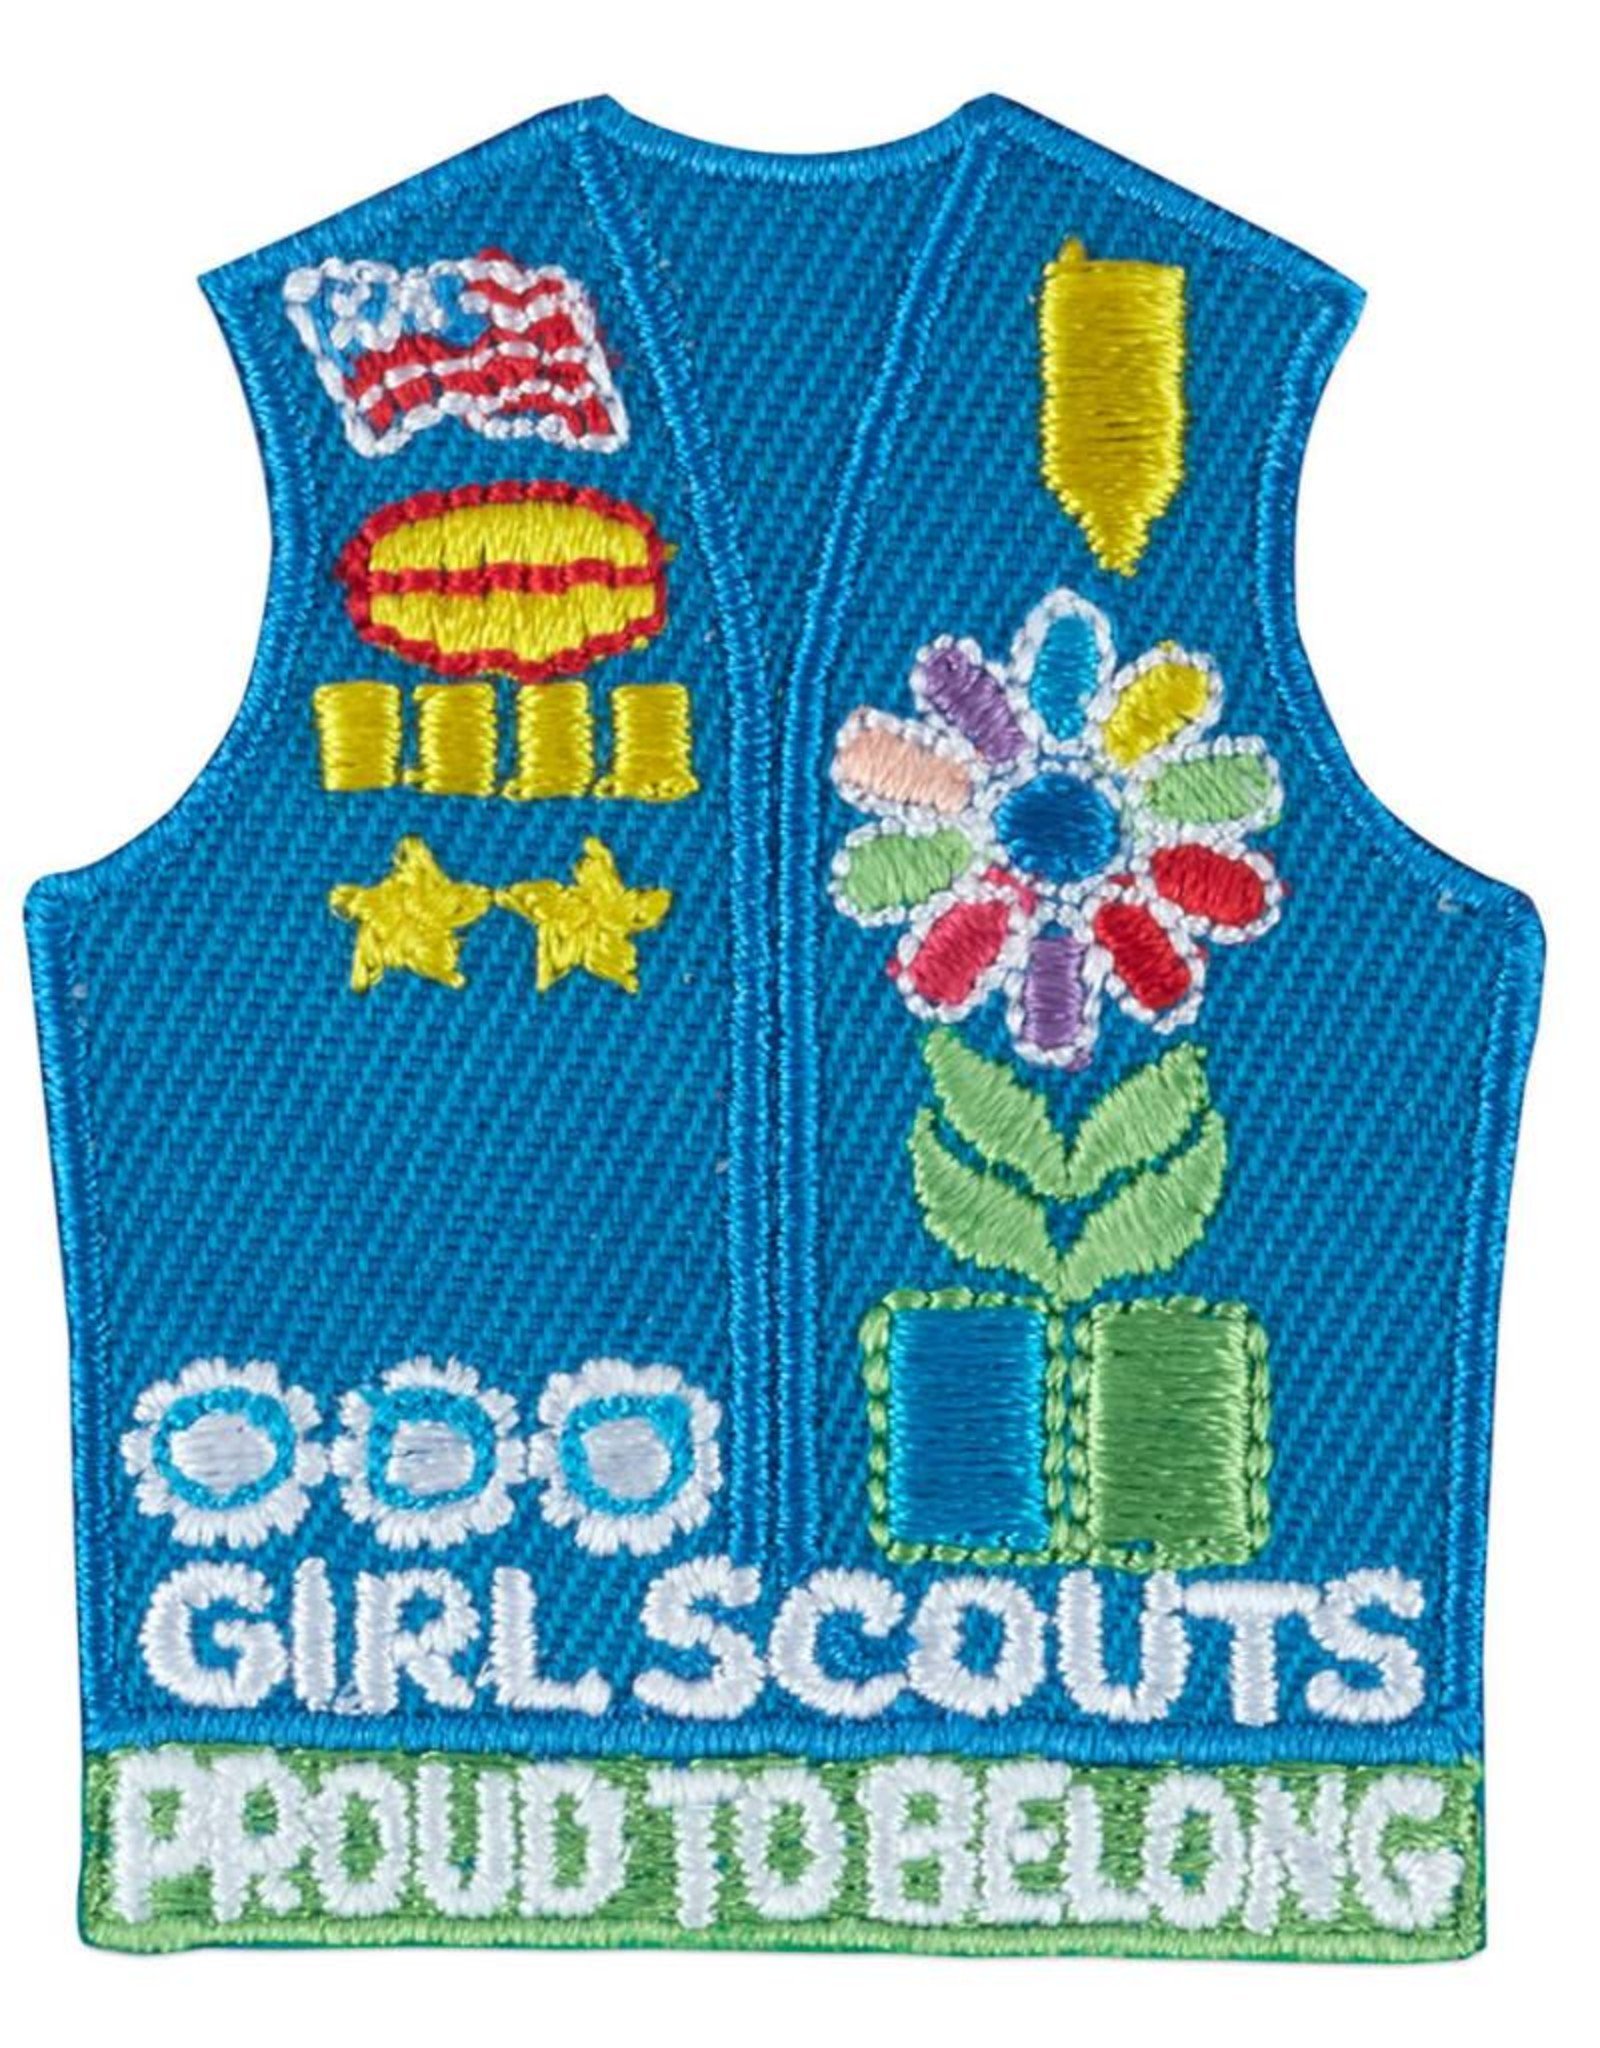 GIRL SCOUTS OF THE USA *Daisy Vest With Insignia Iron-On Fun Patch